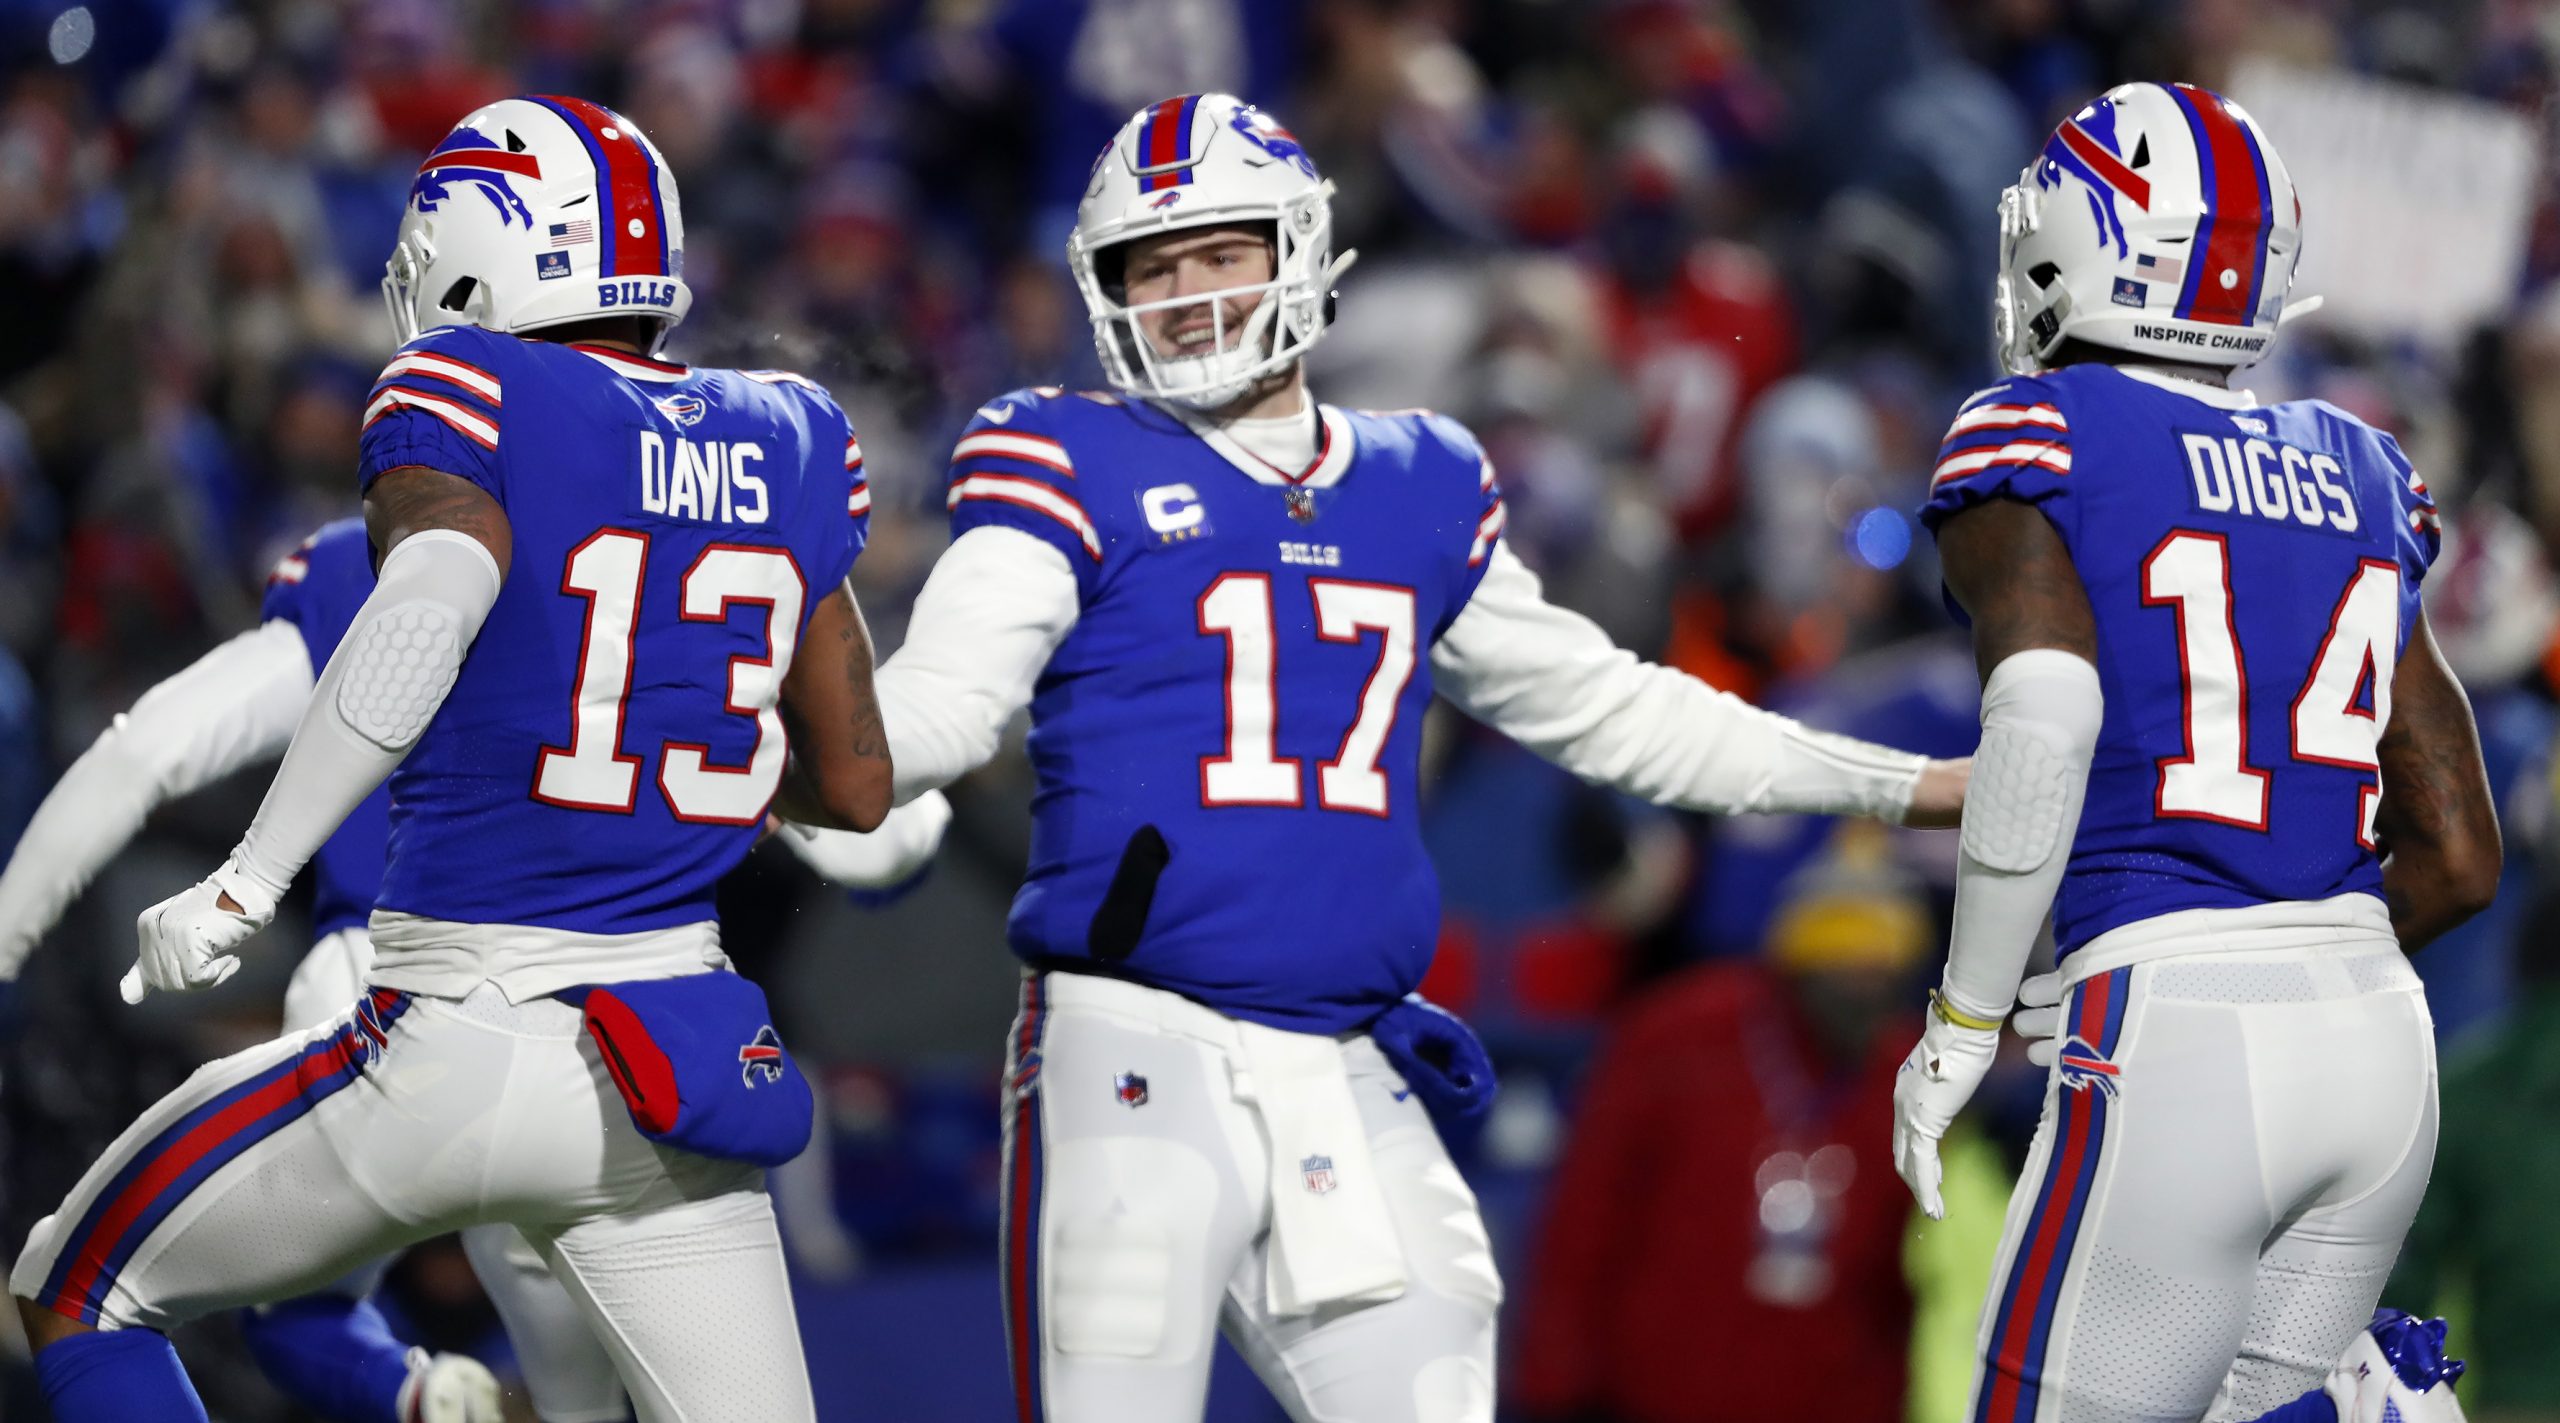 Buffalo Bills quarterback Josh Allen celebrates a touchdown with wide receivers Gabriel Davis and Stefon Diggs. The Buffalo Bills now play the Kansas City Chiefs in a AFC Divisional Round playoff game on January 23, 2022.